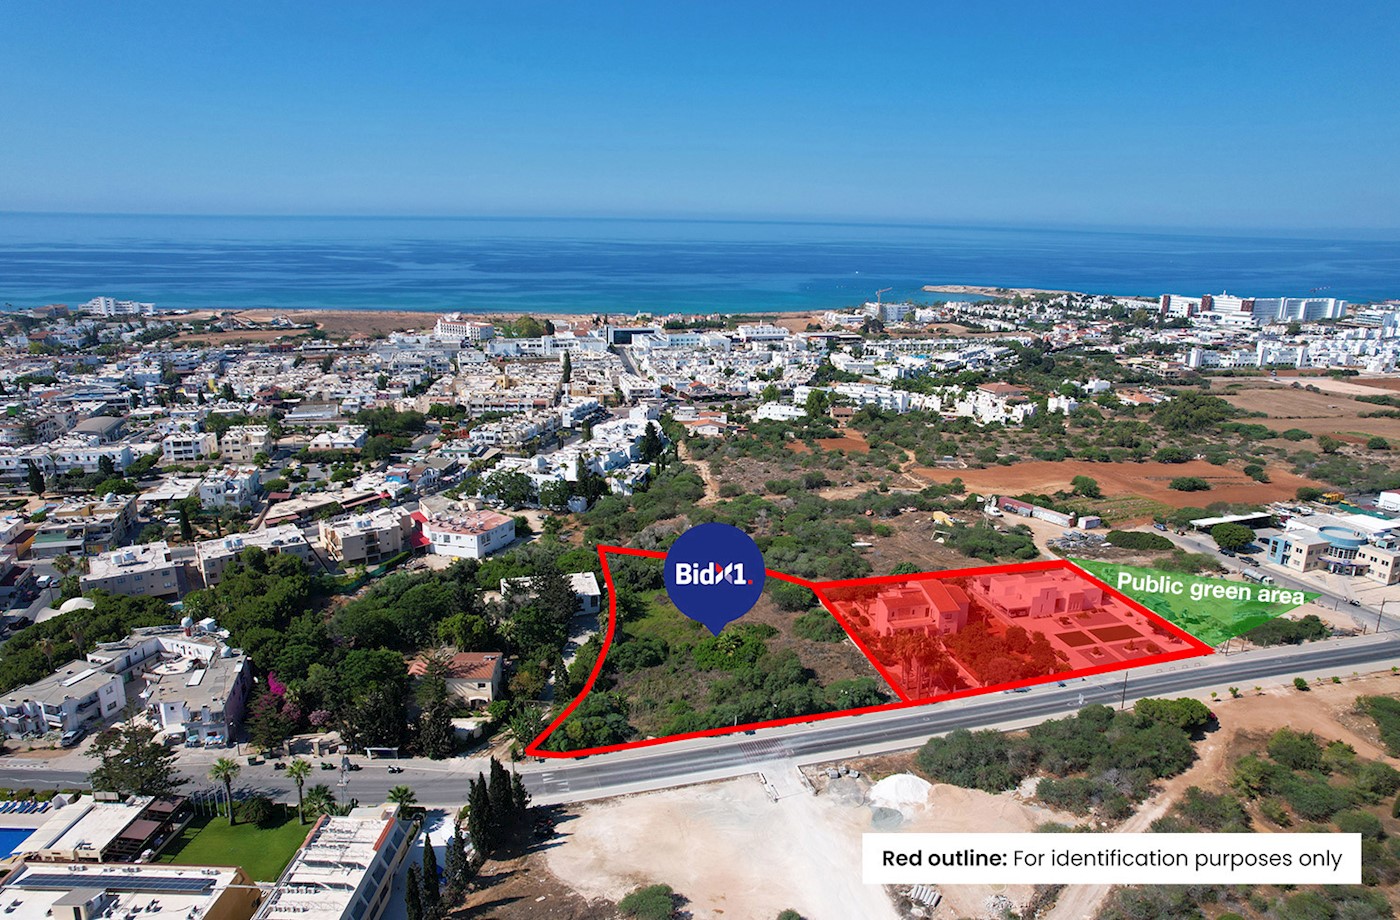 Half-share of 2 adjoining residential fields in Ayia Napa, Famagusta 1/3